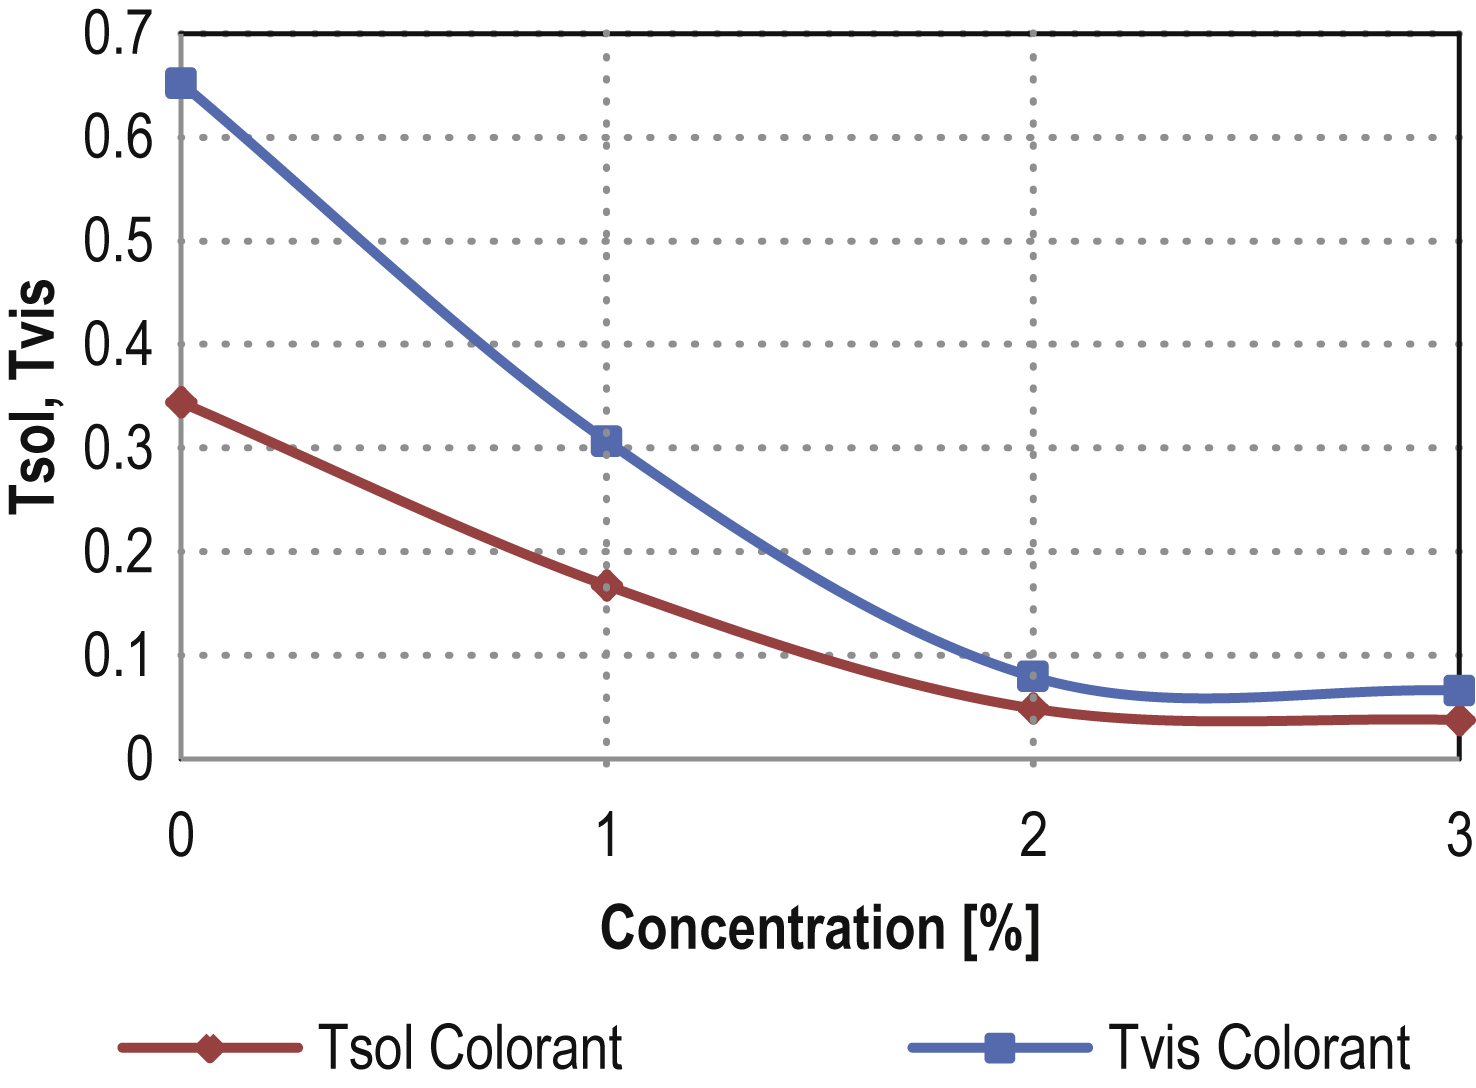 Tsol and Tvis of the studied colorant product at different concentration in percentage of the solution.